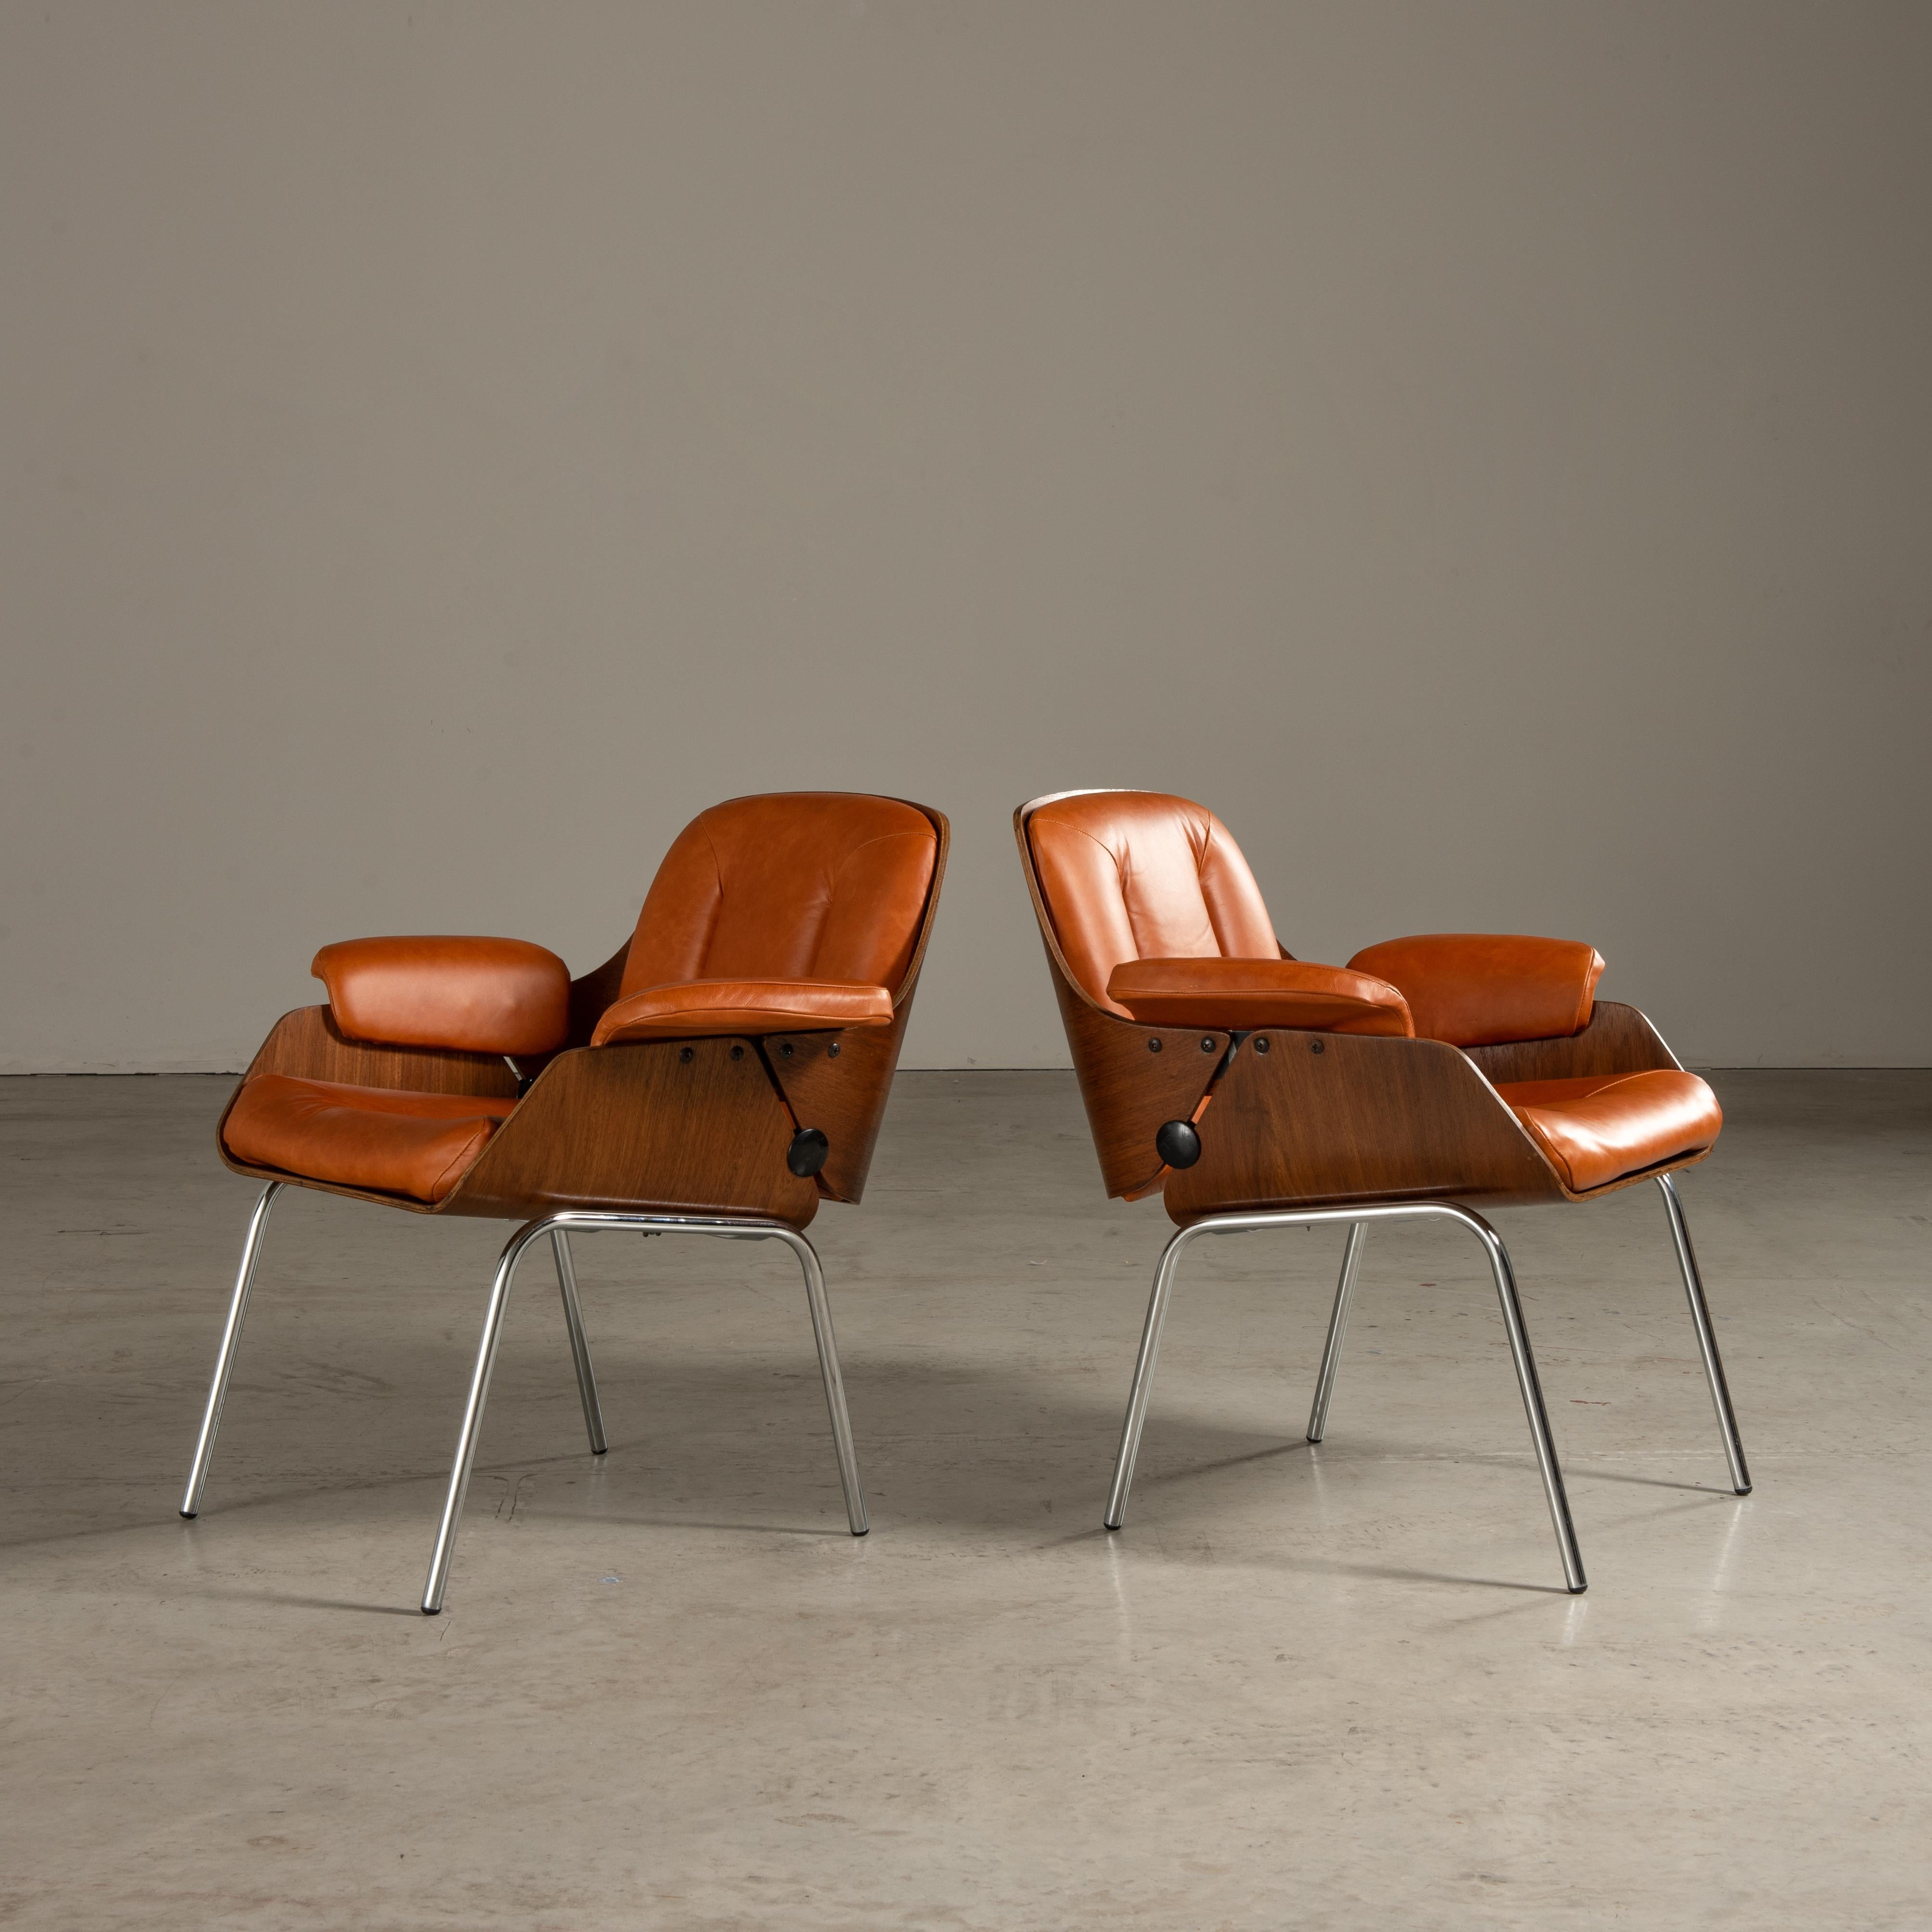 Armchair with Wood, Leather and Steel, by Carlo Fongaro, Brazilian Mid-Century For Sale 2